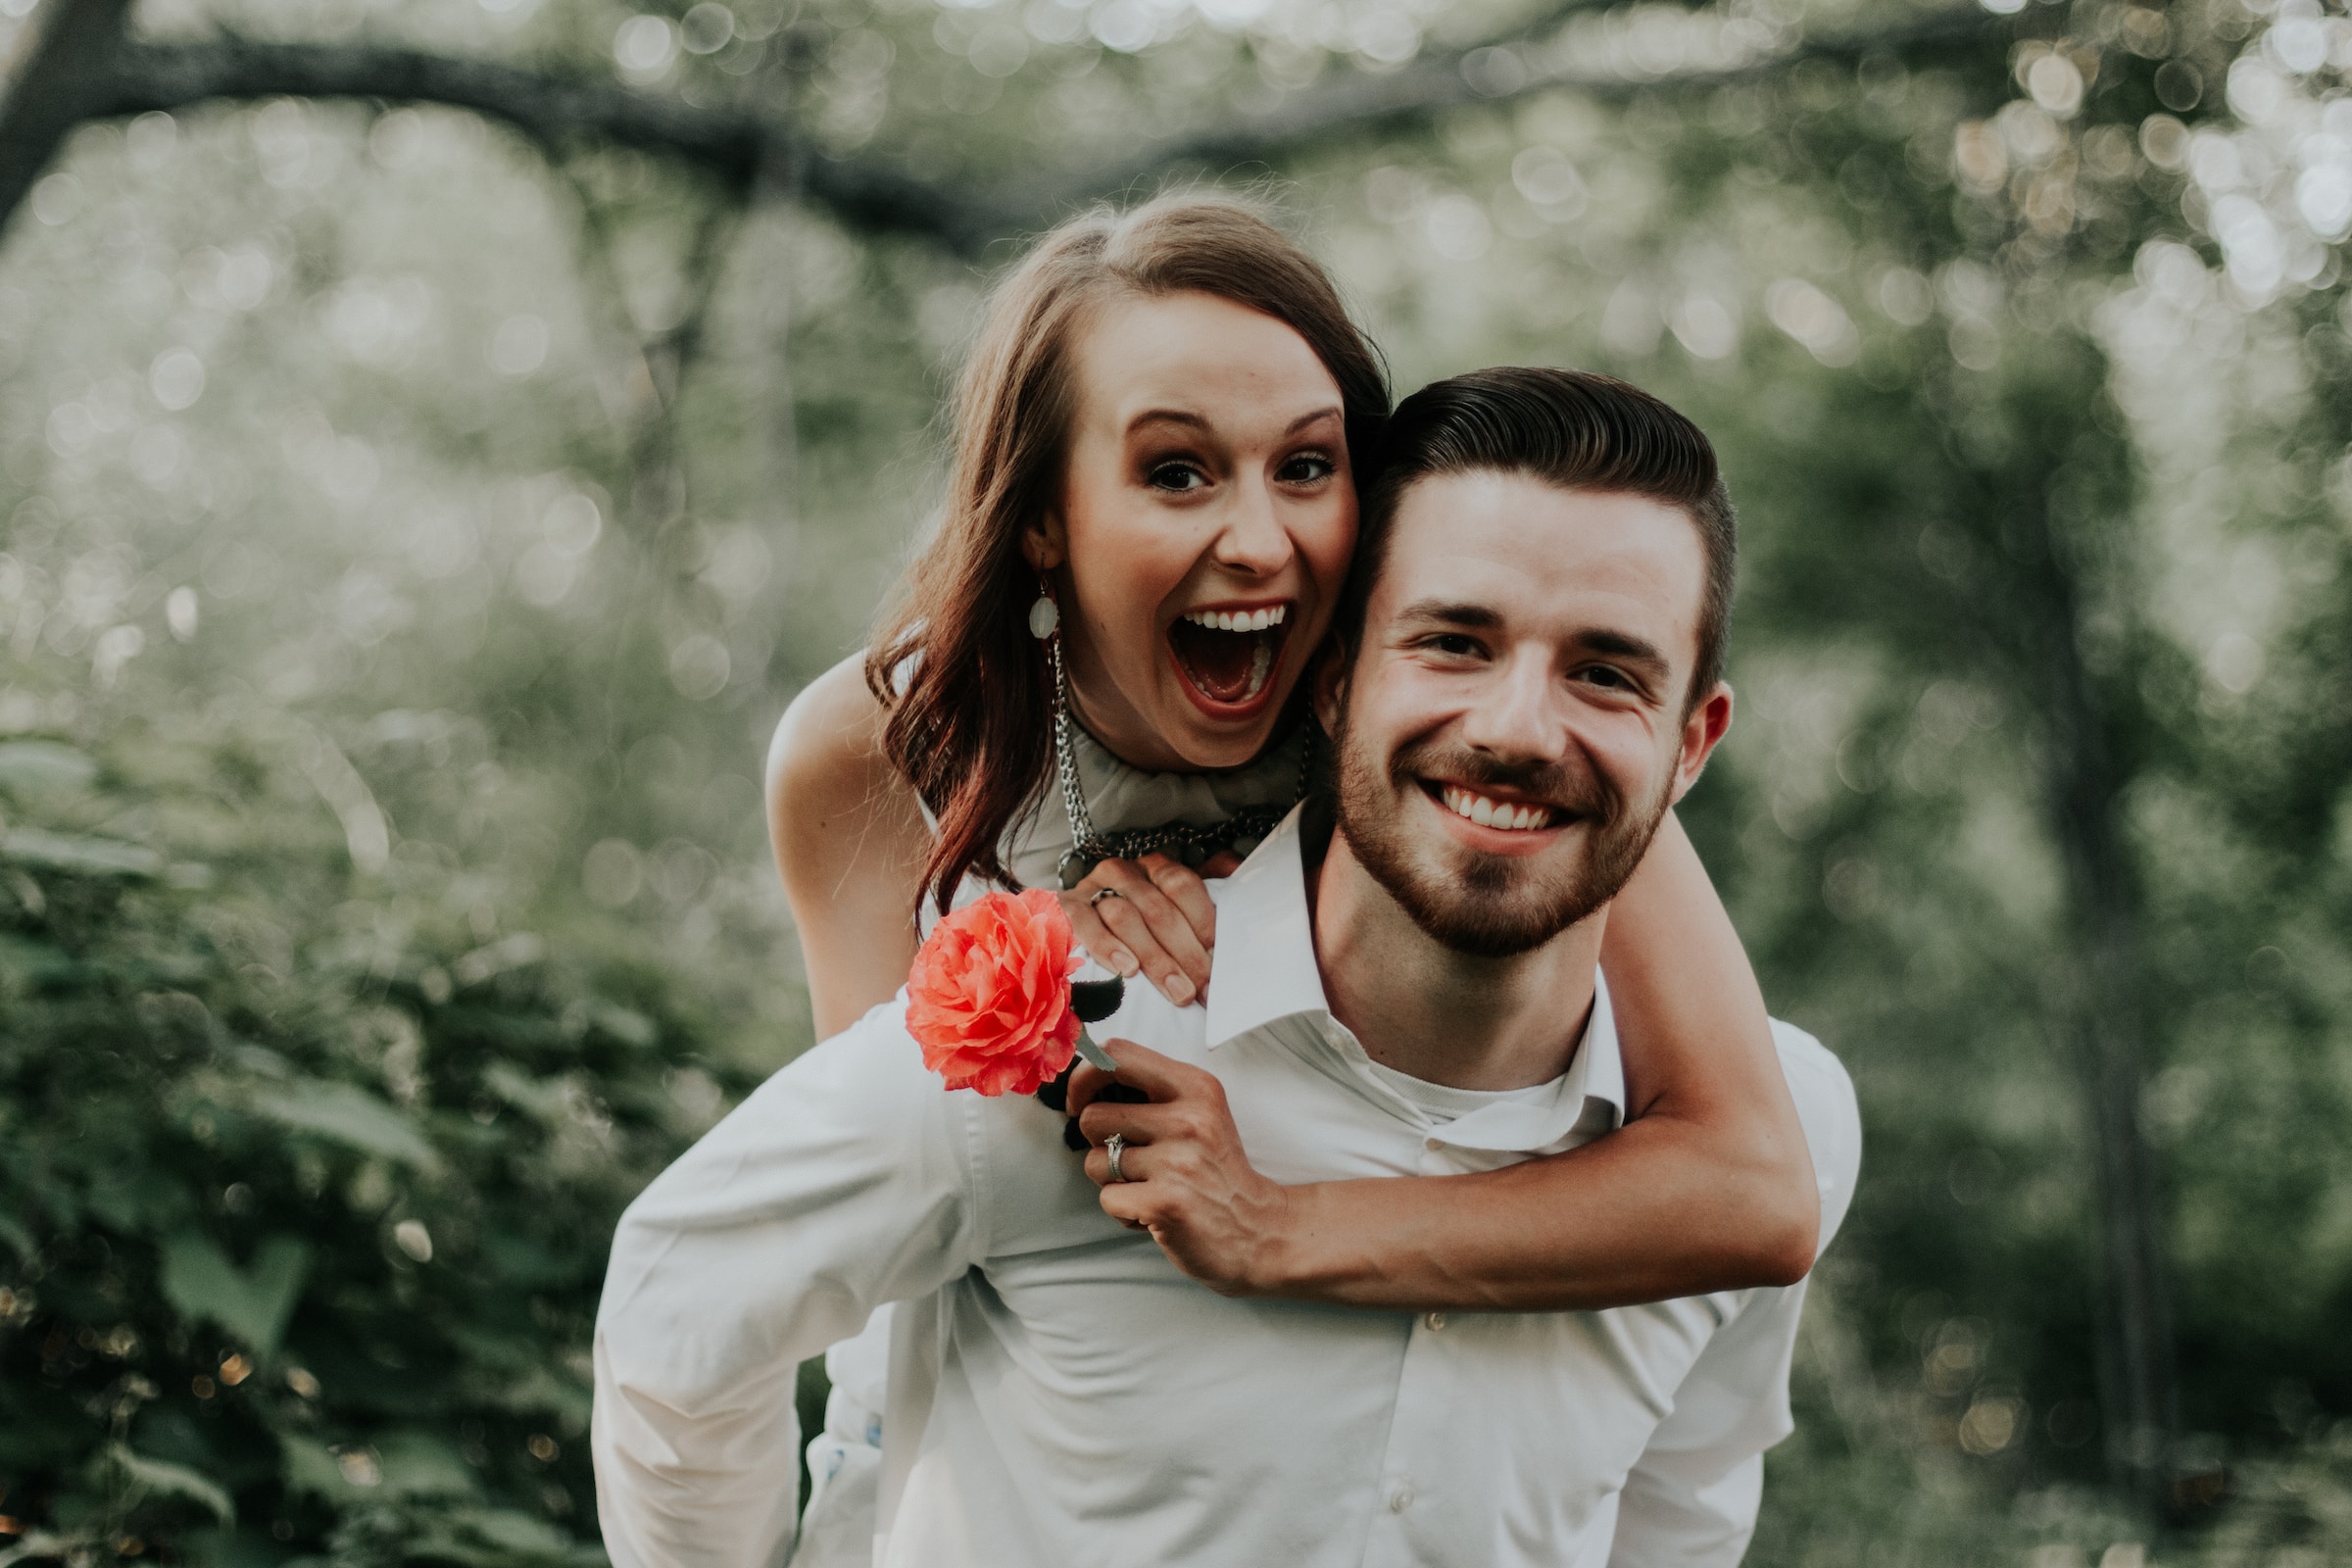 Couple smiling at the camera. | Source: Unsplash